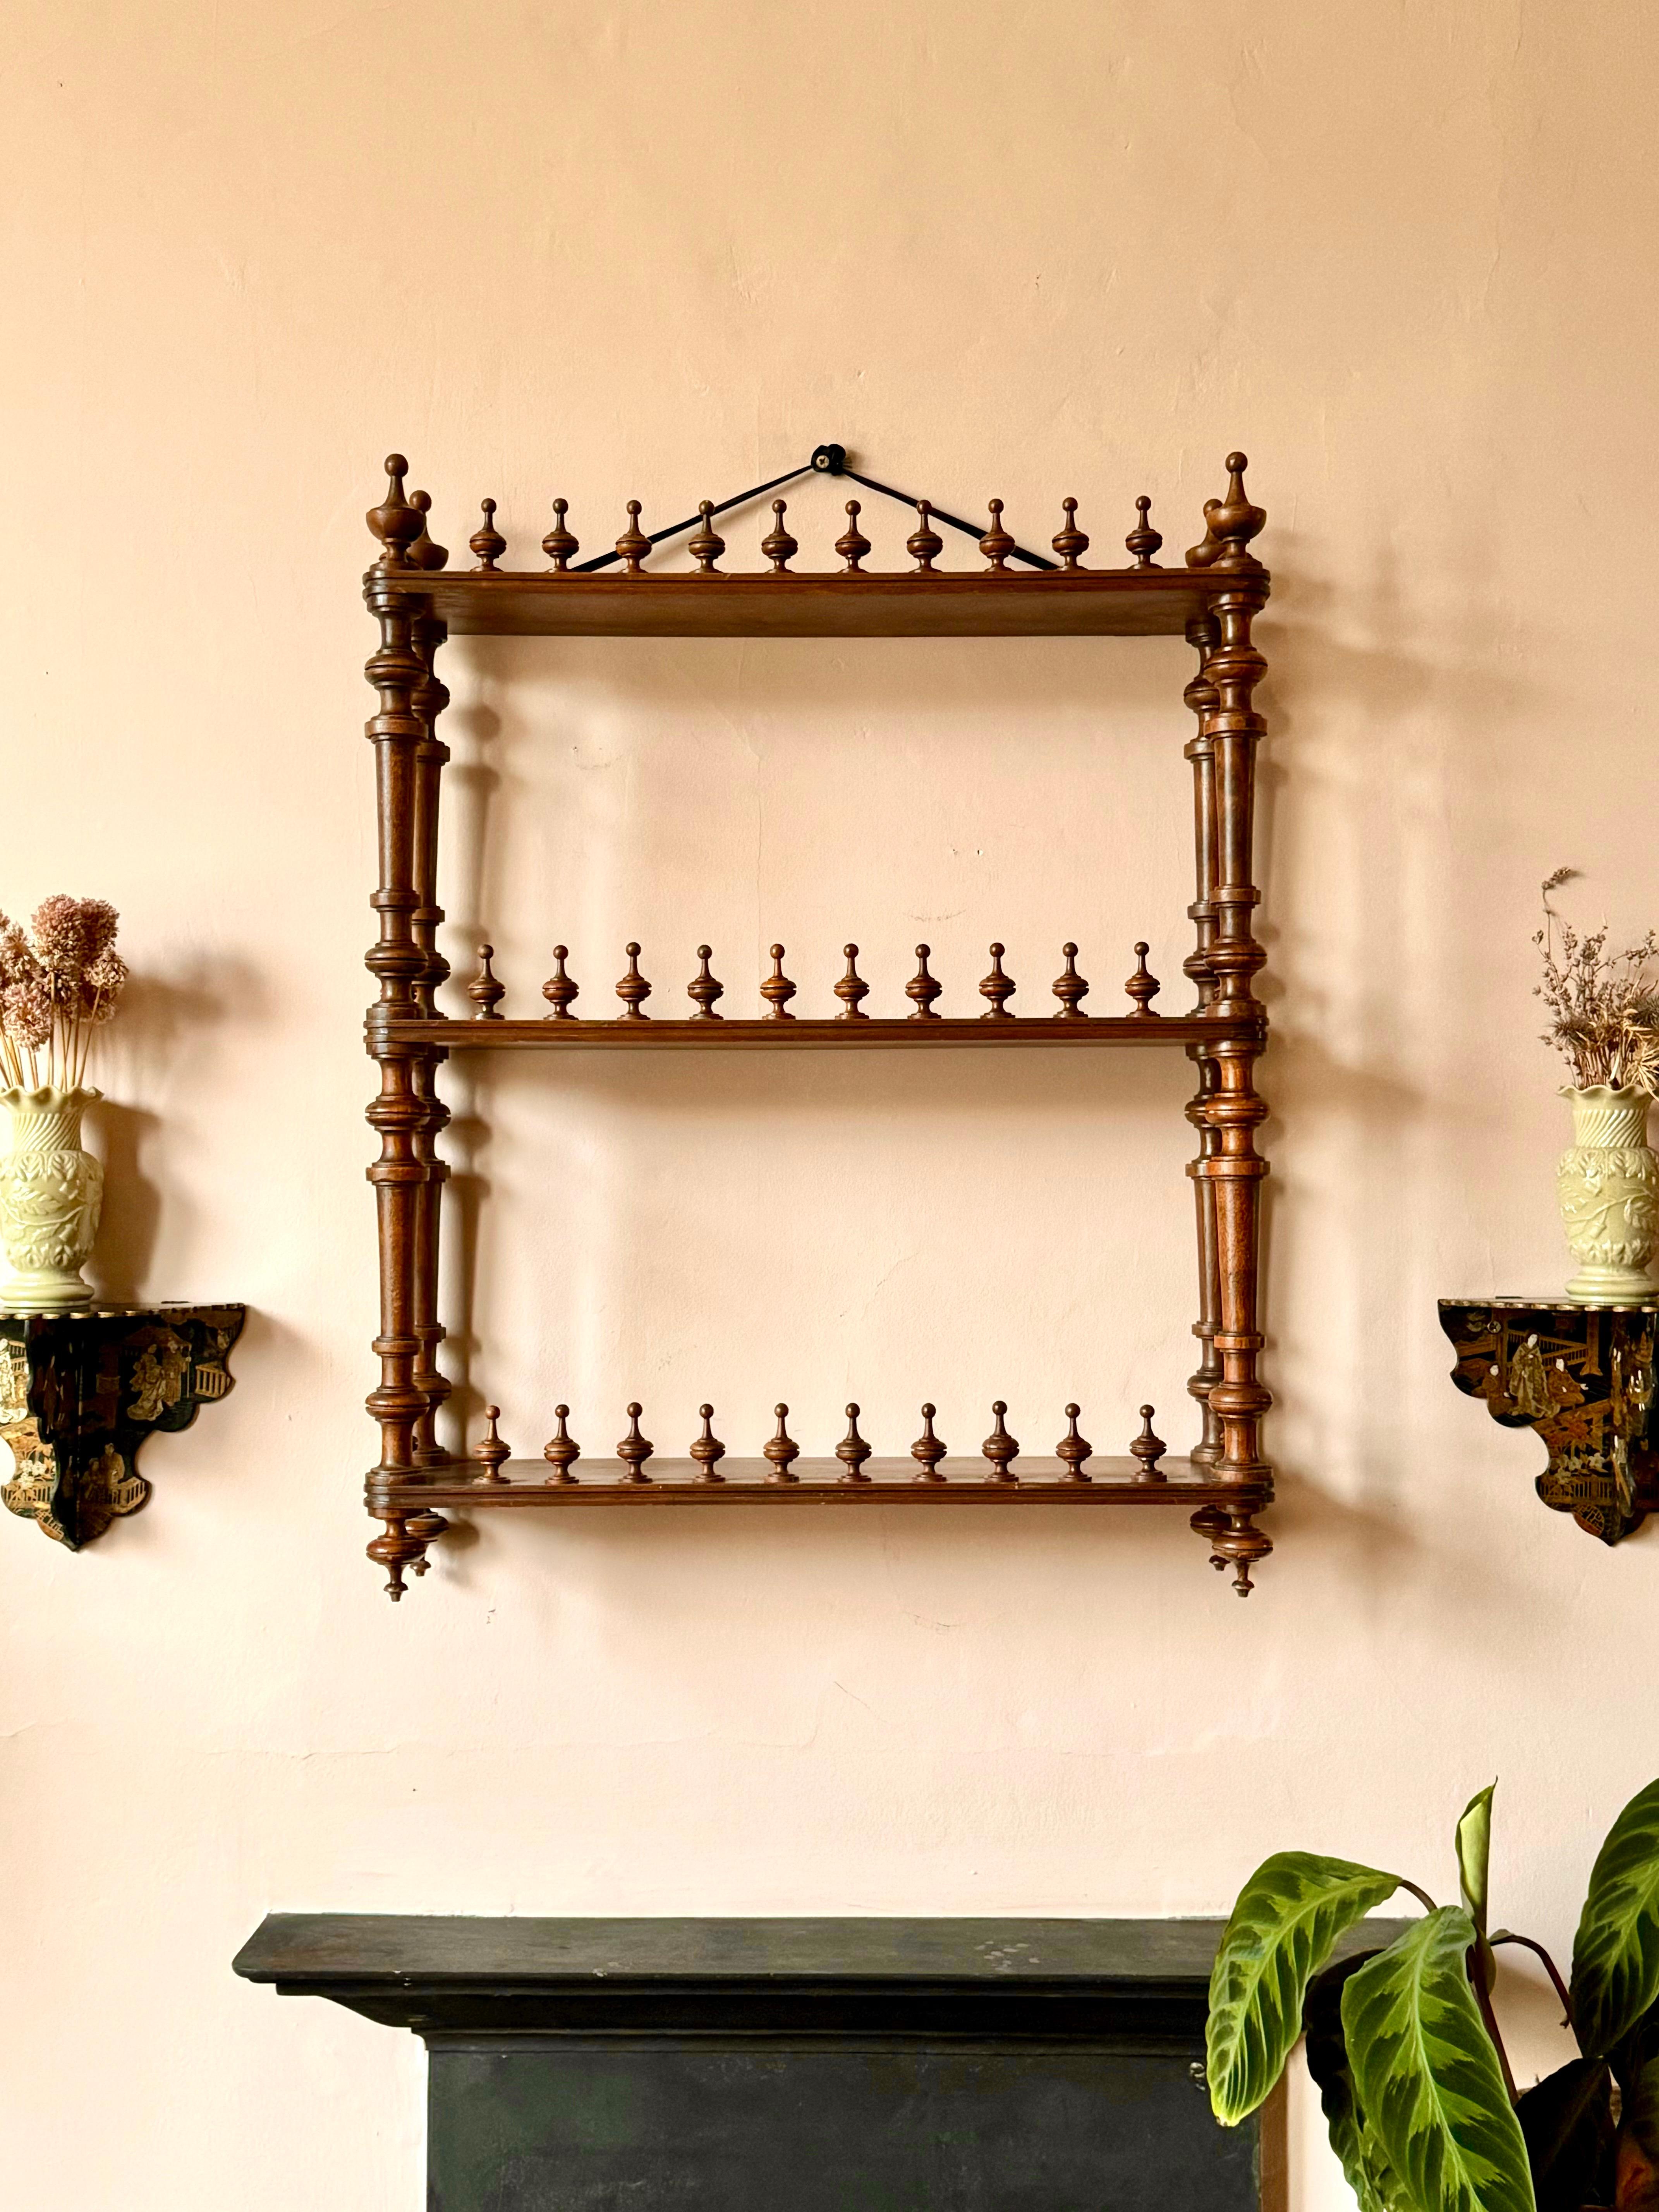 C19th French mahogany wall shelf.

Gorgeous Napoleon III three tier étagère with an abundance of wonderful turned finials. 

In excellent and sturdy condition with very light wear.